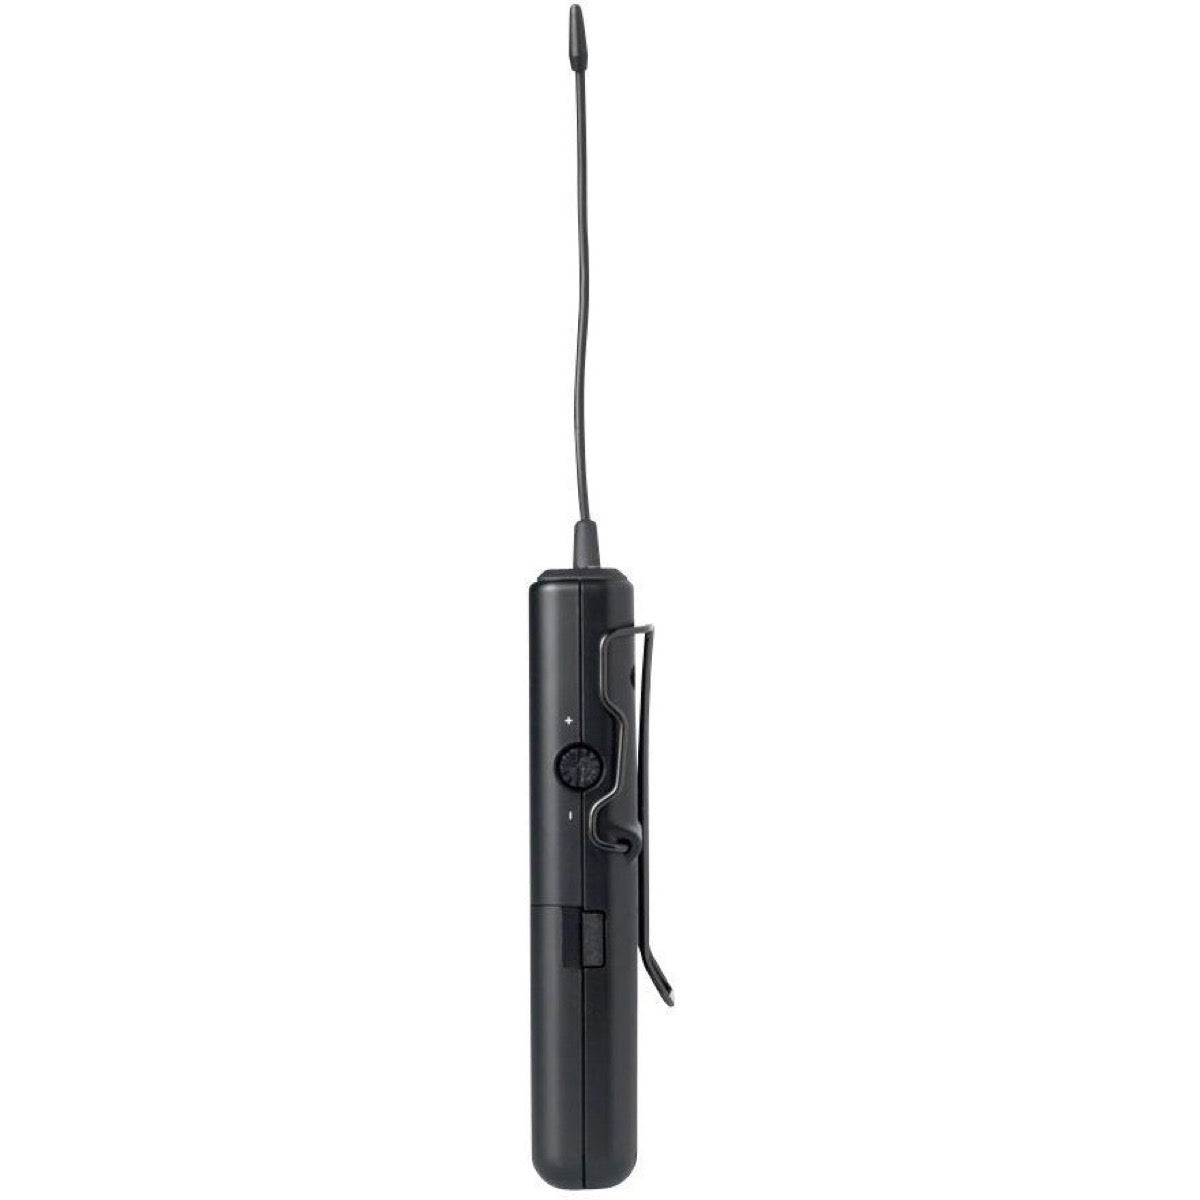 Shure PGXD1 Digital Wireless Bodypack Transmitter, Group X8, Frequencies 902.00 - 928.00